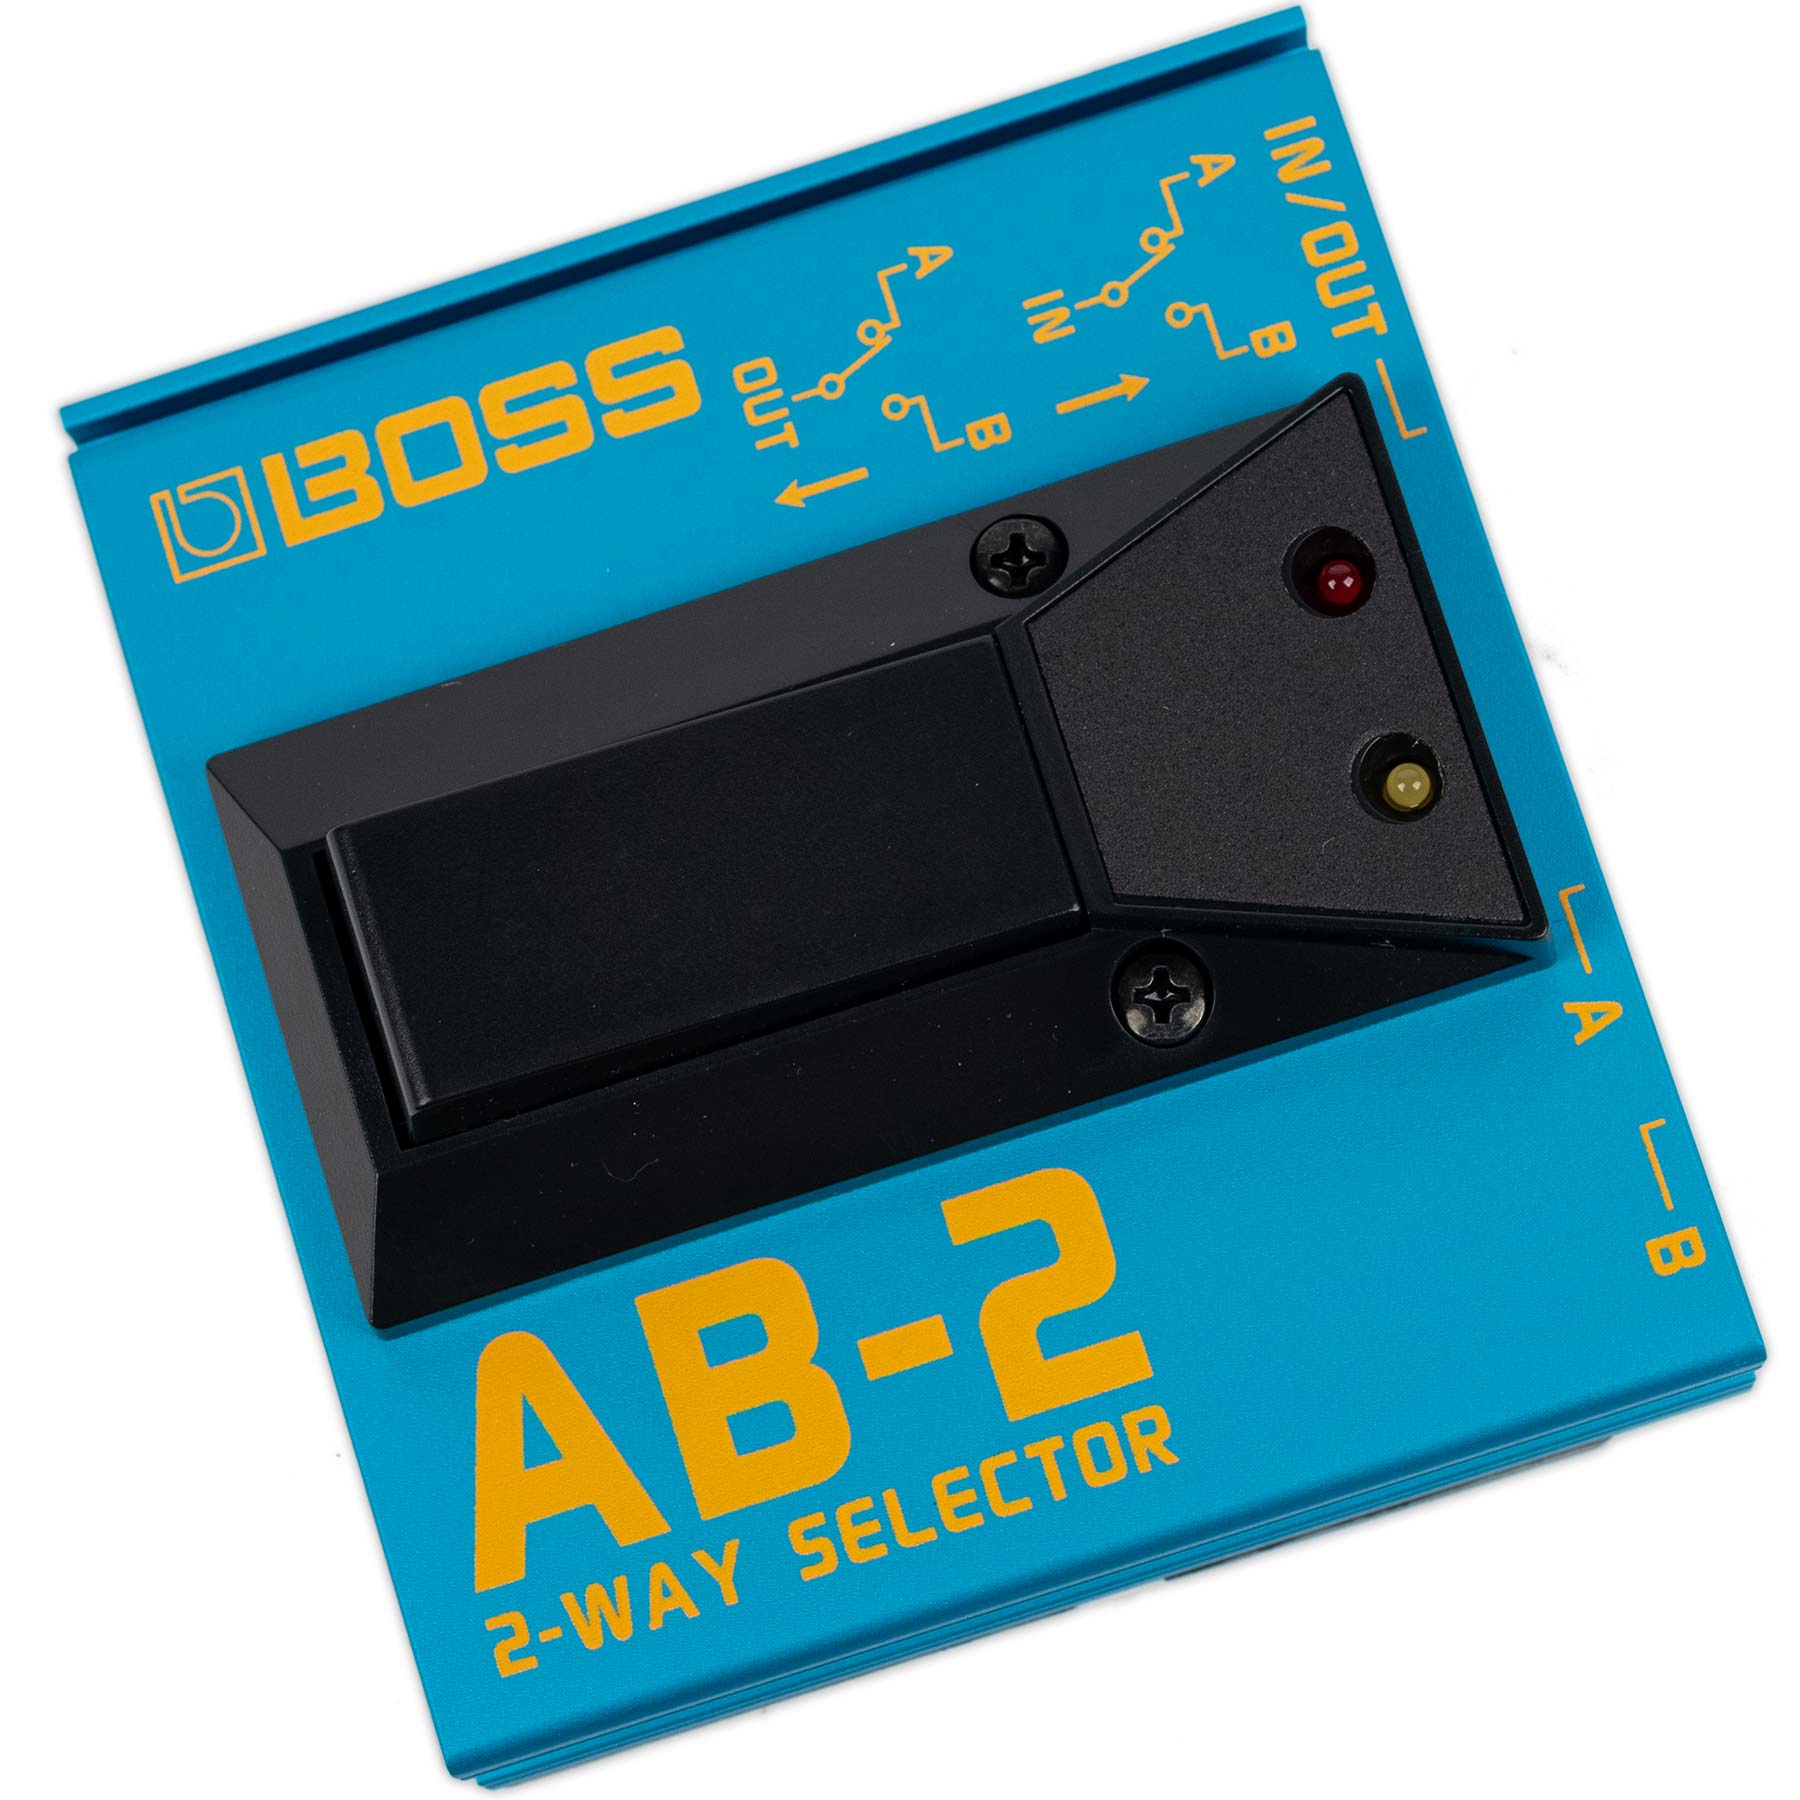 BOSS AB-2 2-WAY SELECTOR FOOTSWITCH